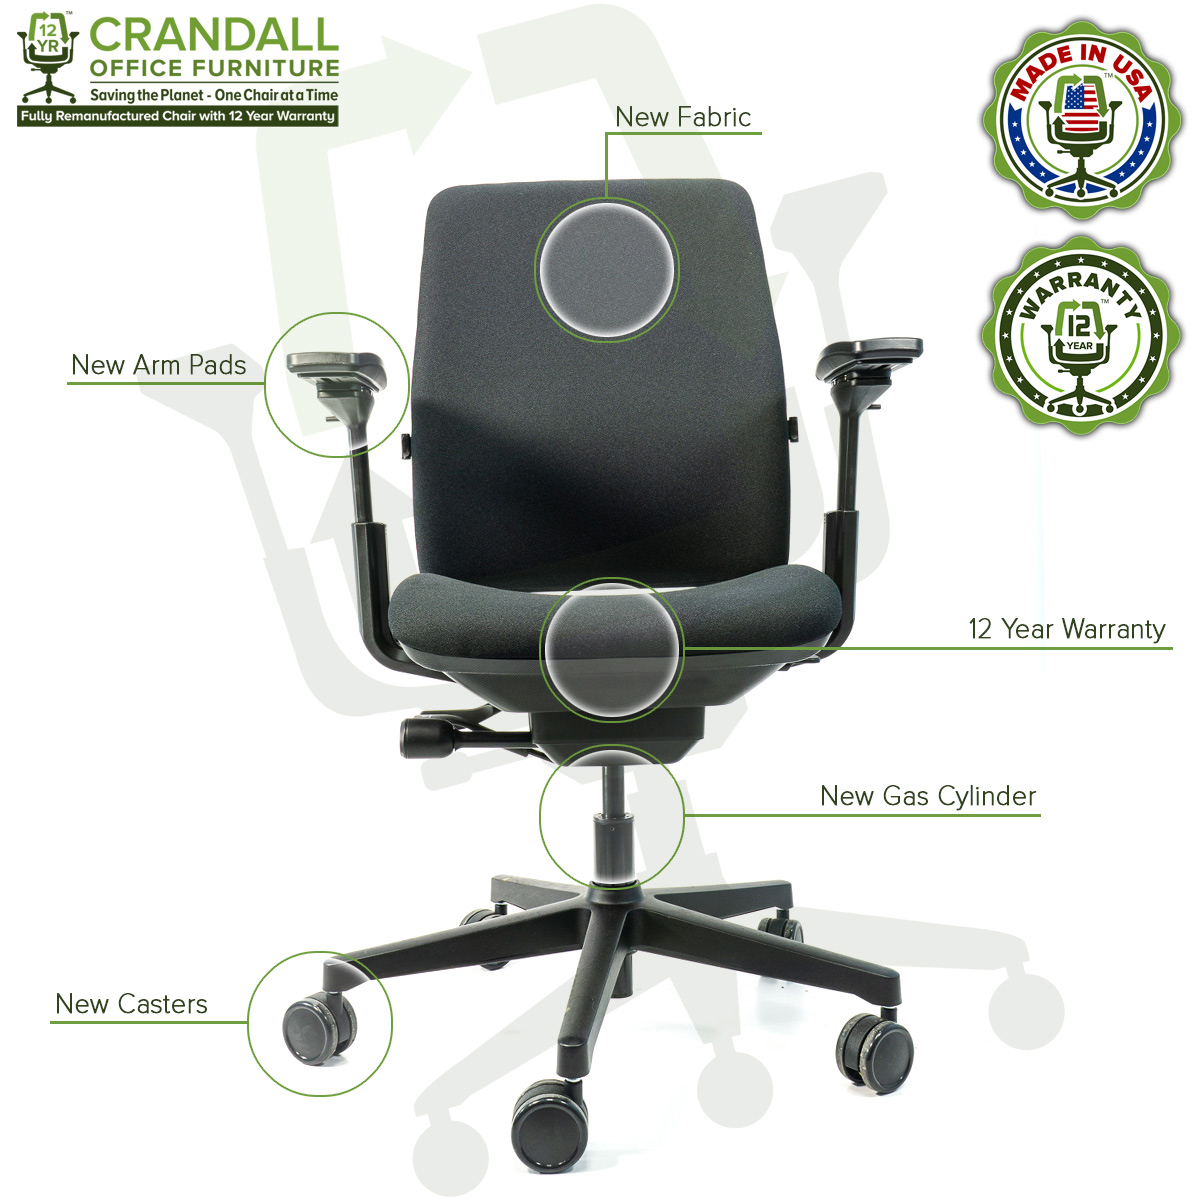 Crandall Office Furniture Remanufactured Steelcase Amia Chair with 12 Year Warranty - 09